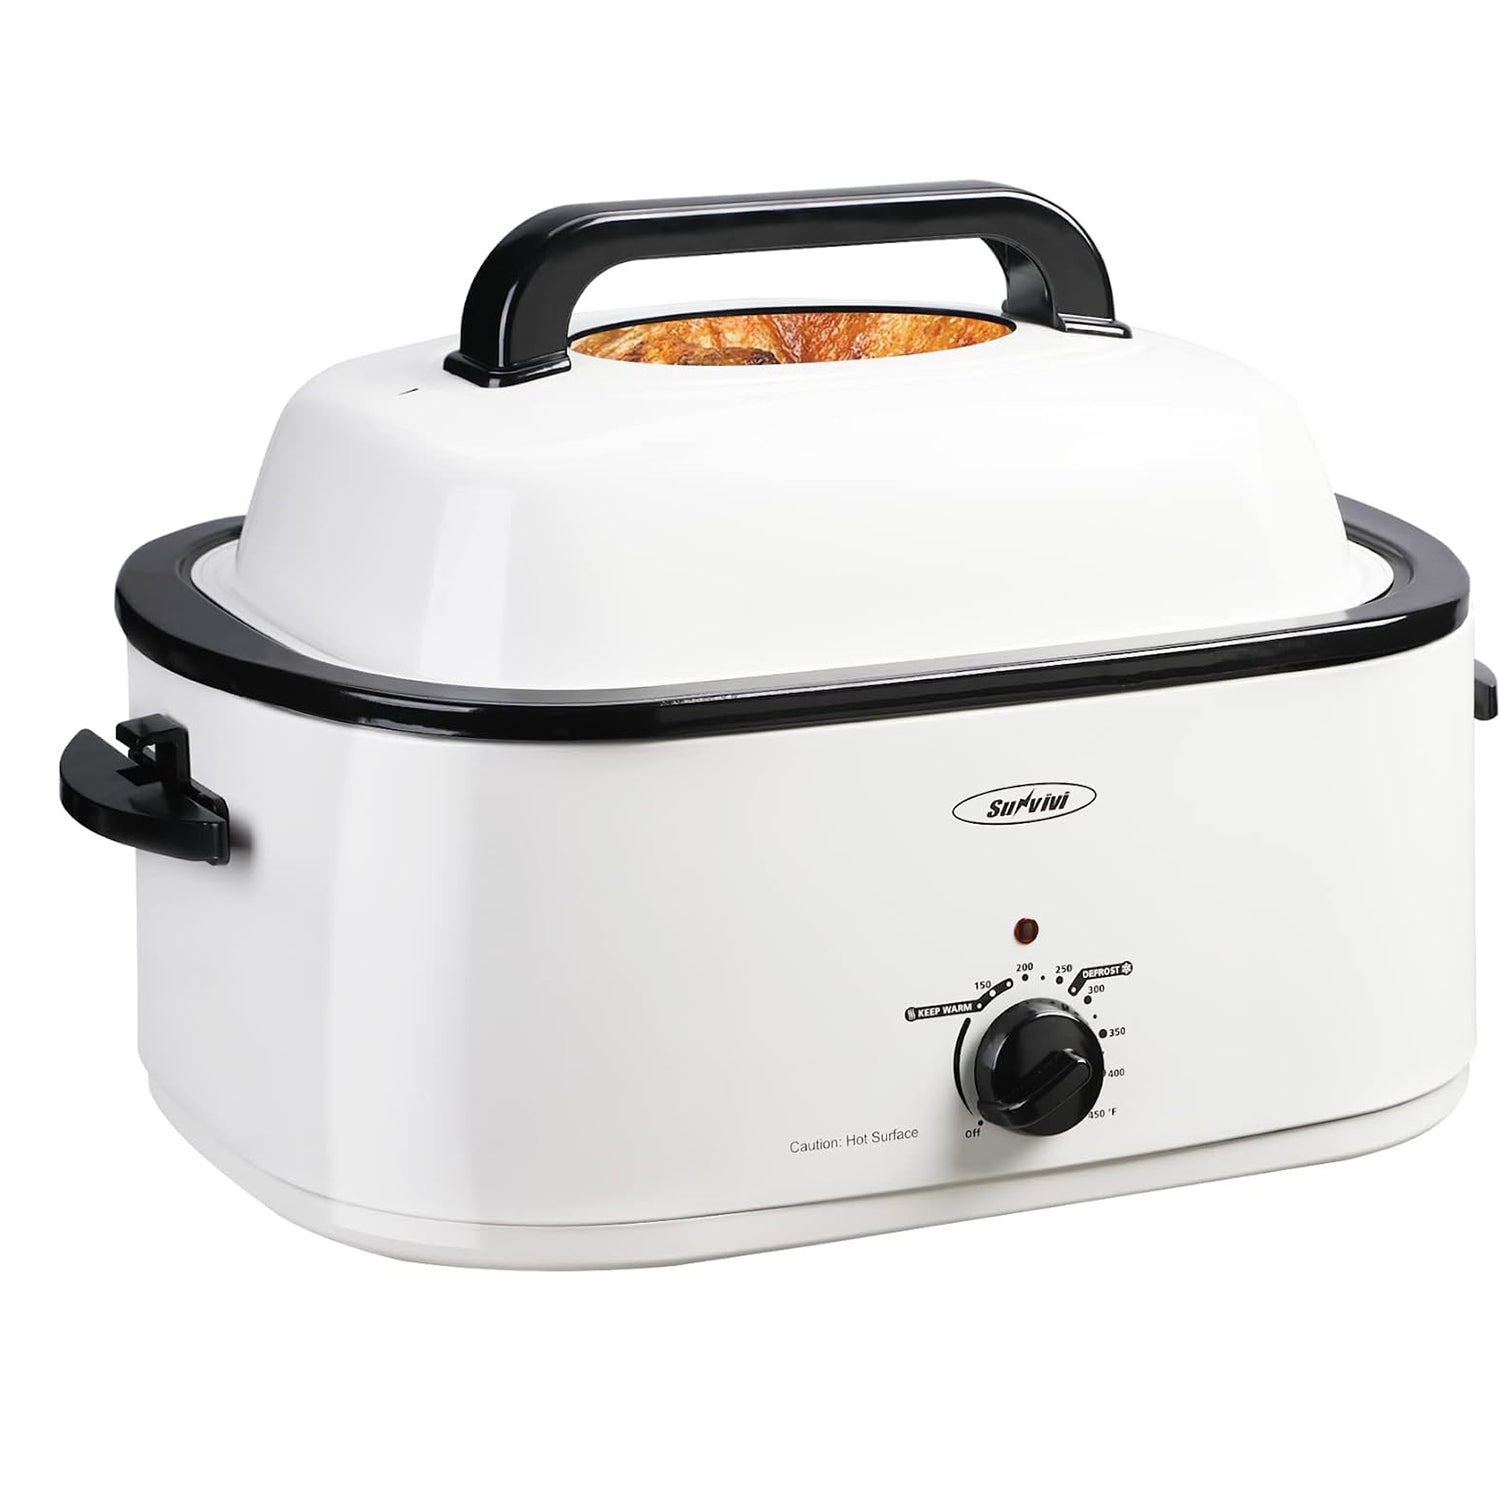 Oster - Not only does this large capacity roaster fit a 26-pound